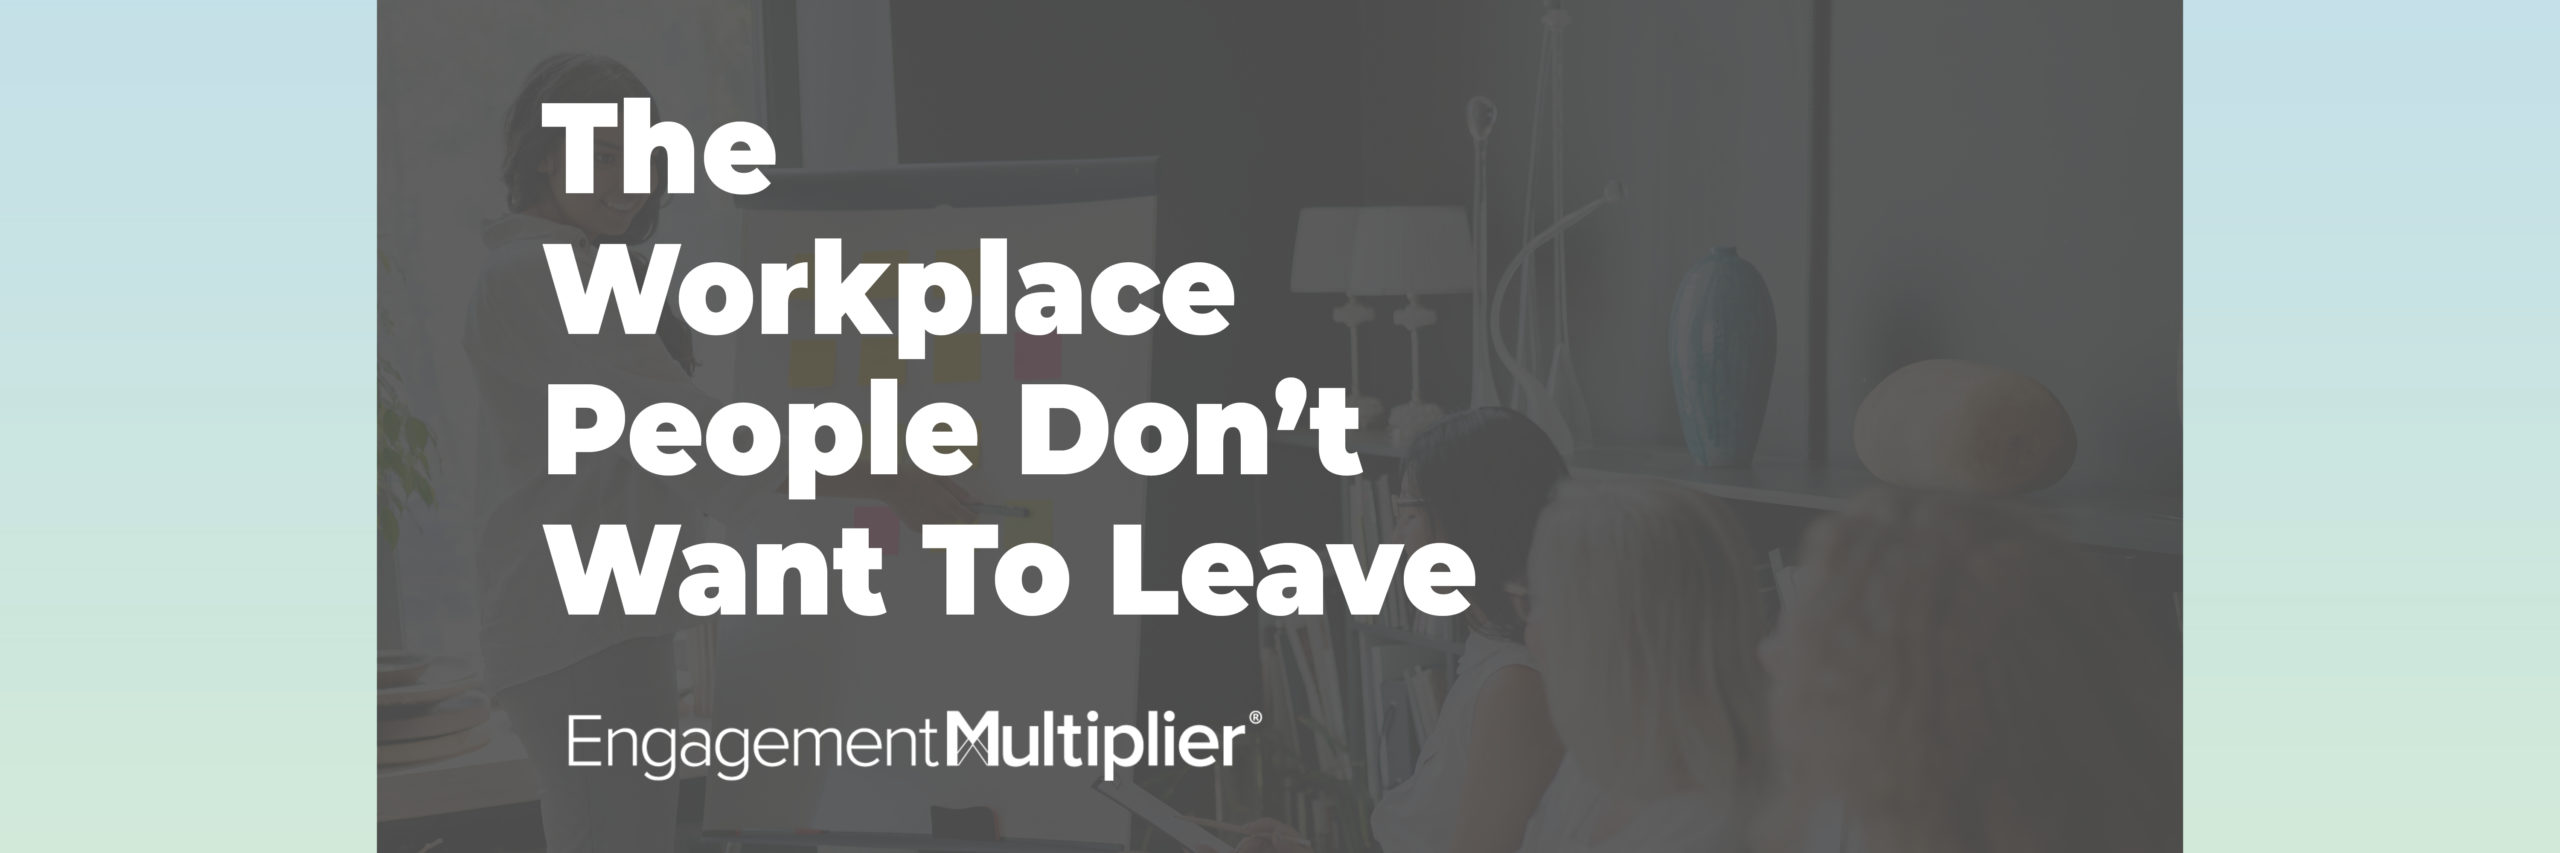 New eBook: The Workplace People Don’t Want to Leave